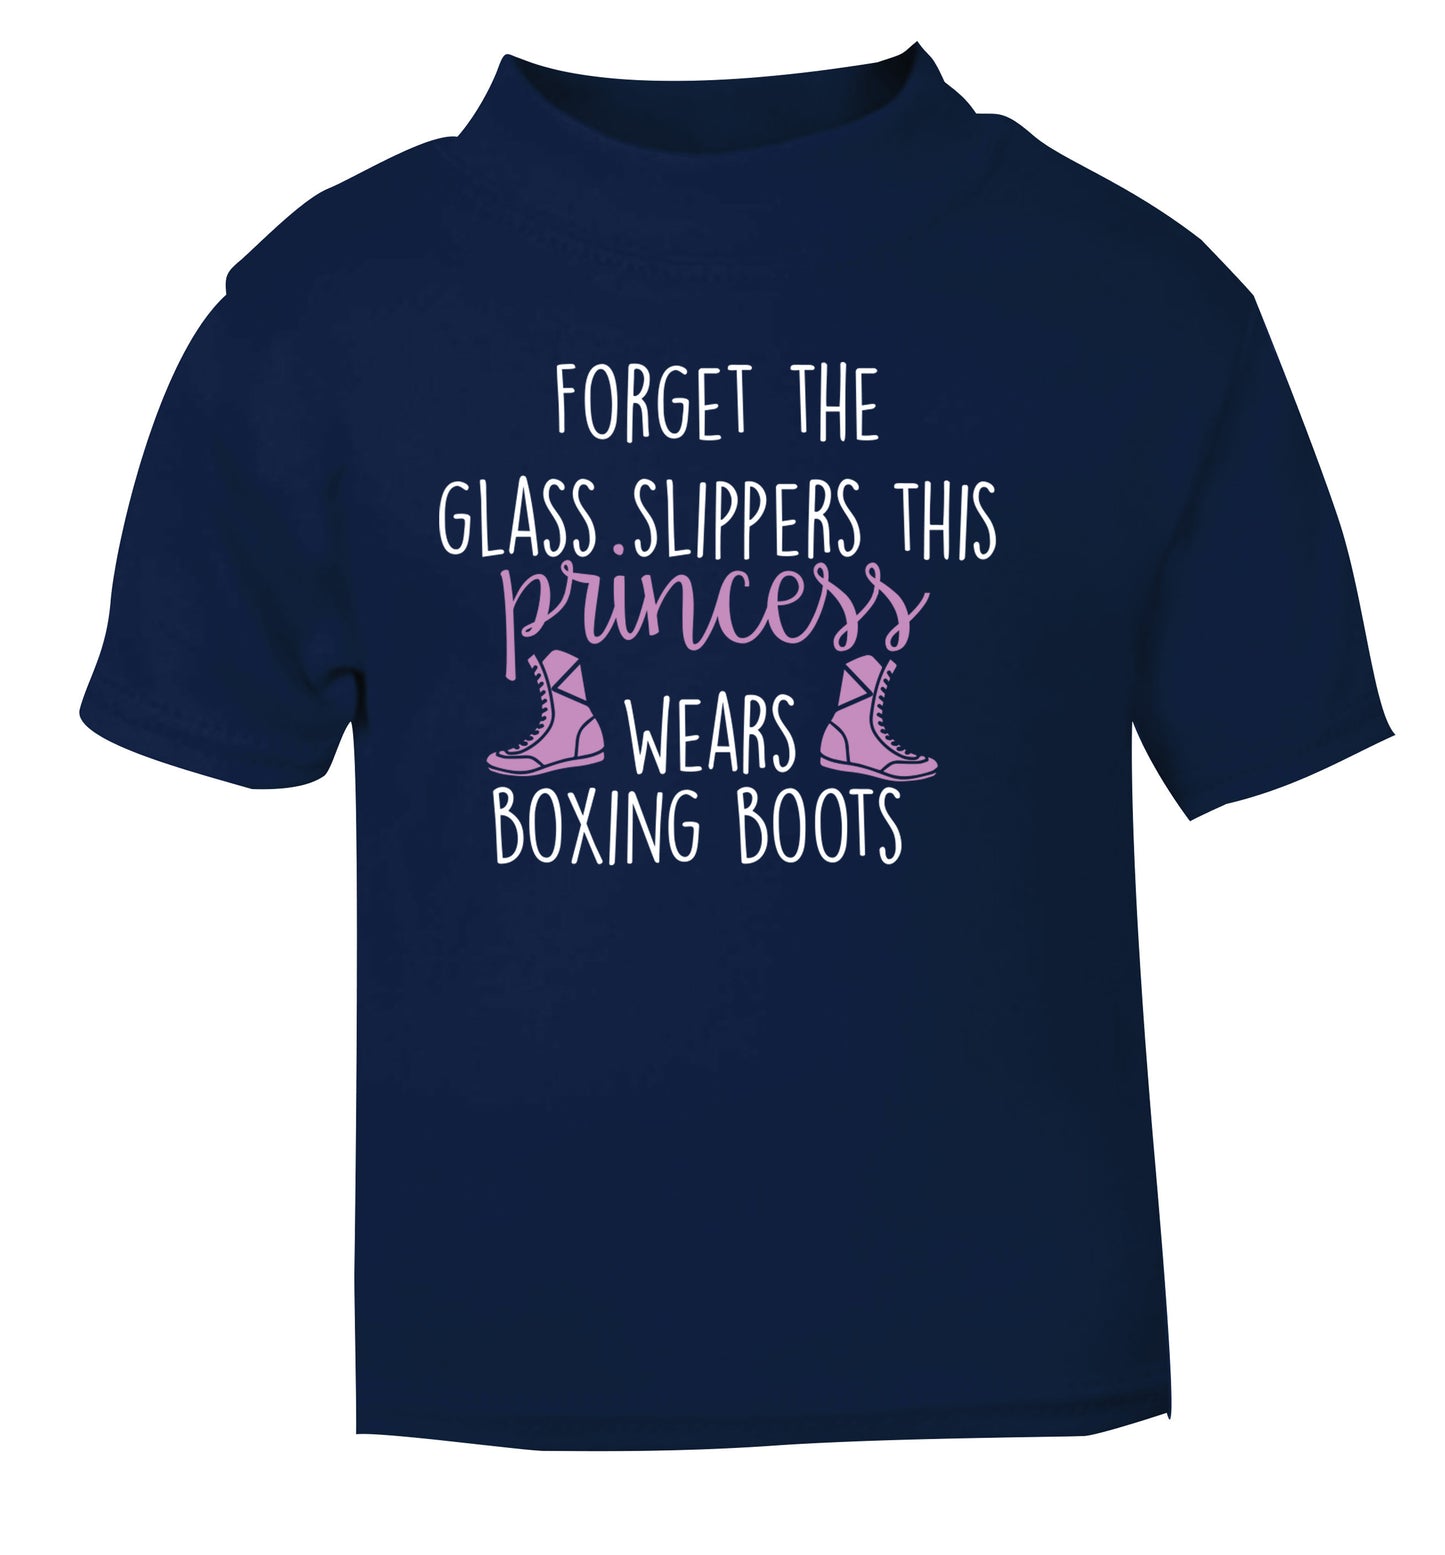 Forget the glass slippers this princess wears boxing boots navy Baby Toddler Tshirt 2 Years